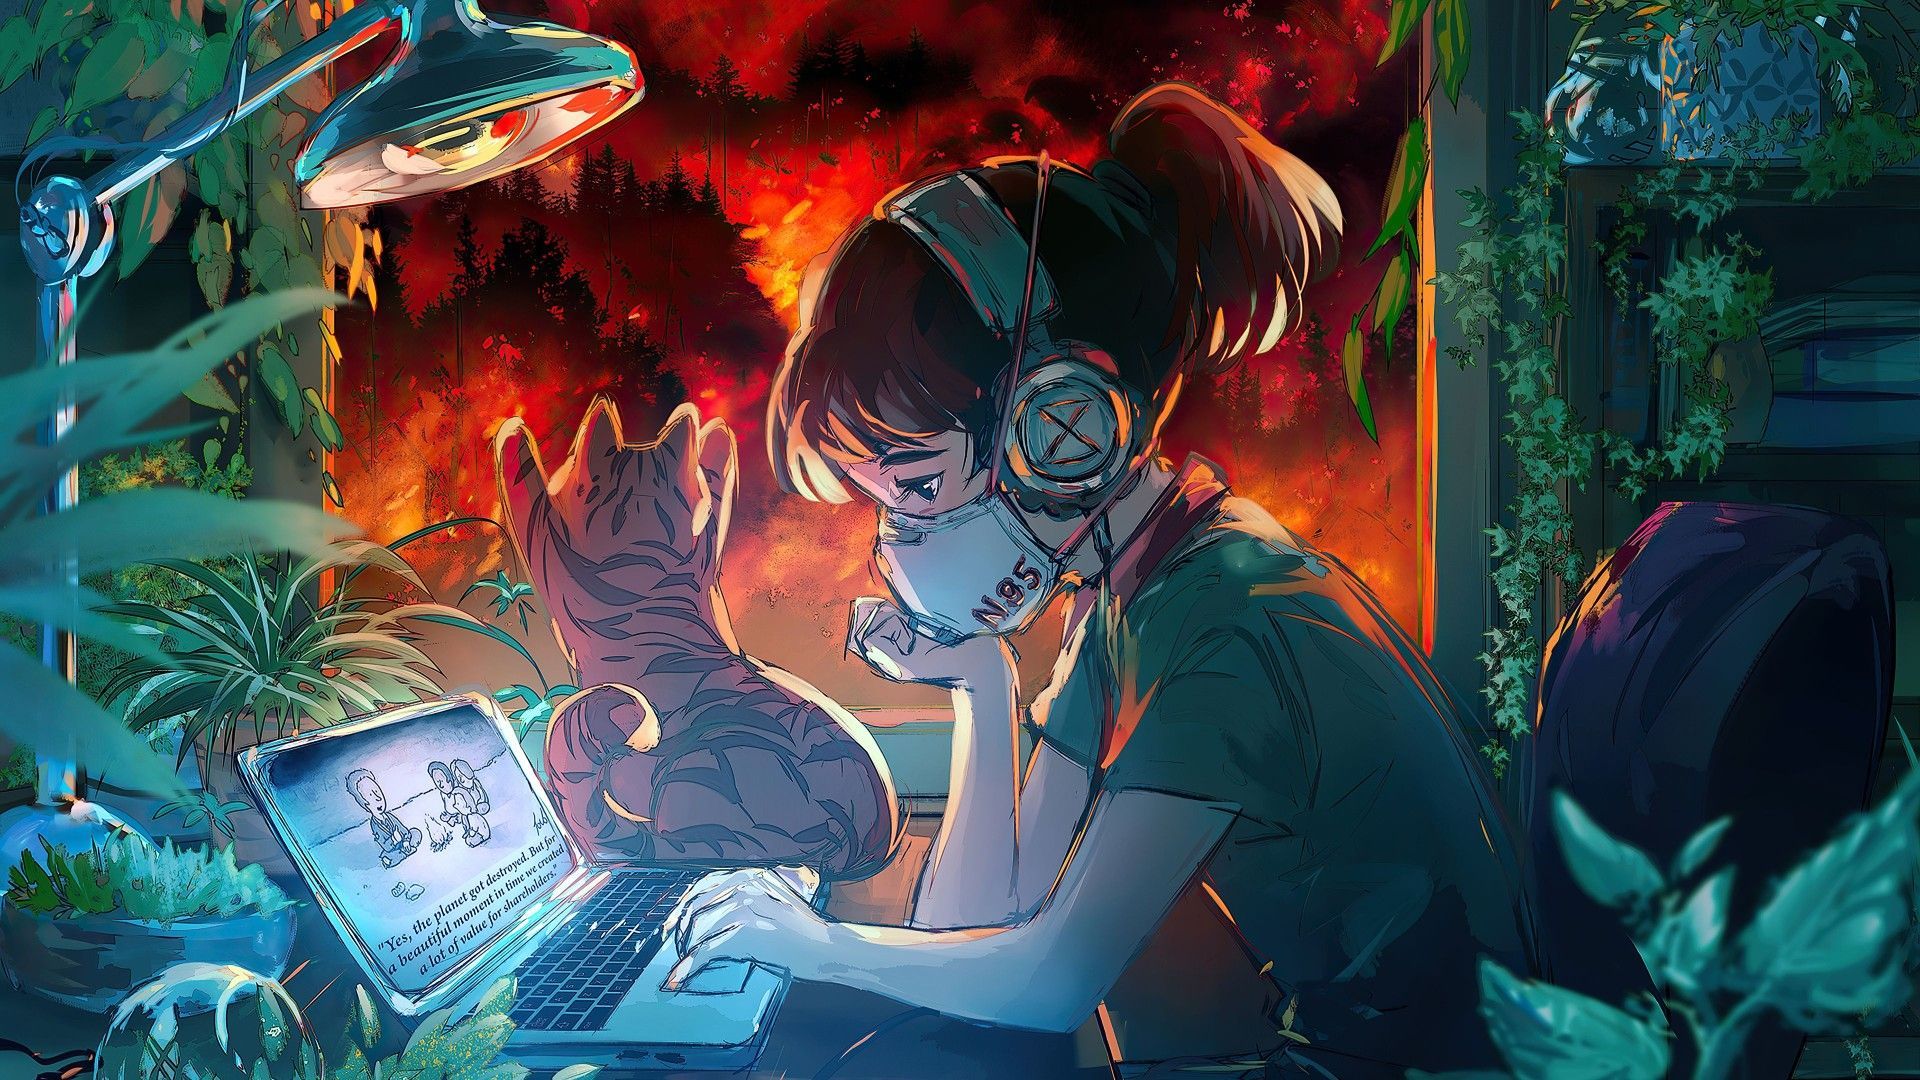 A girl with headphones and glasses is sitting in front of her computer - Laptop, anime